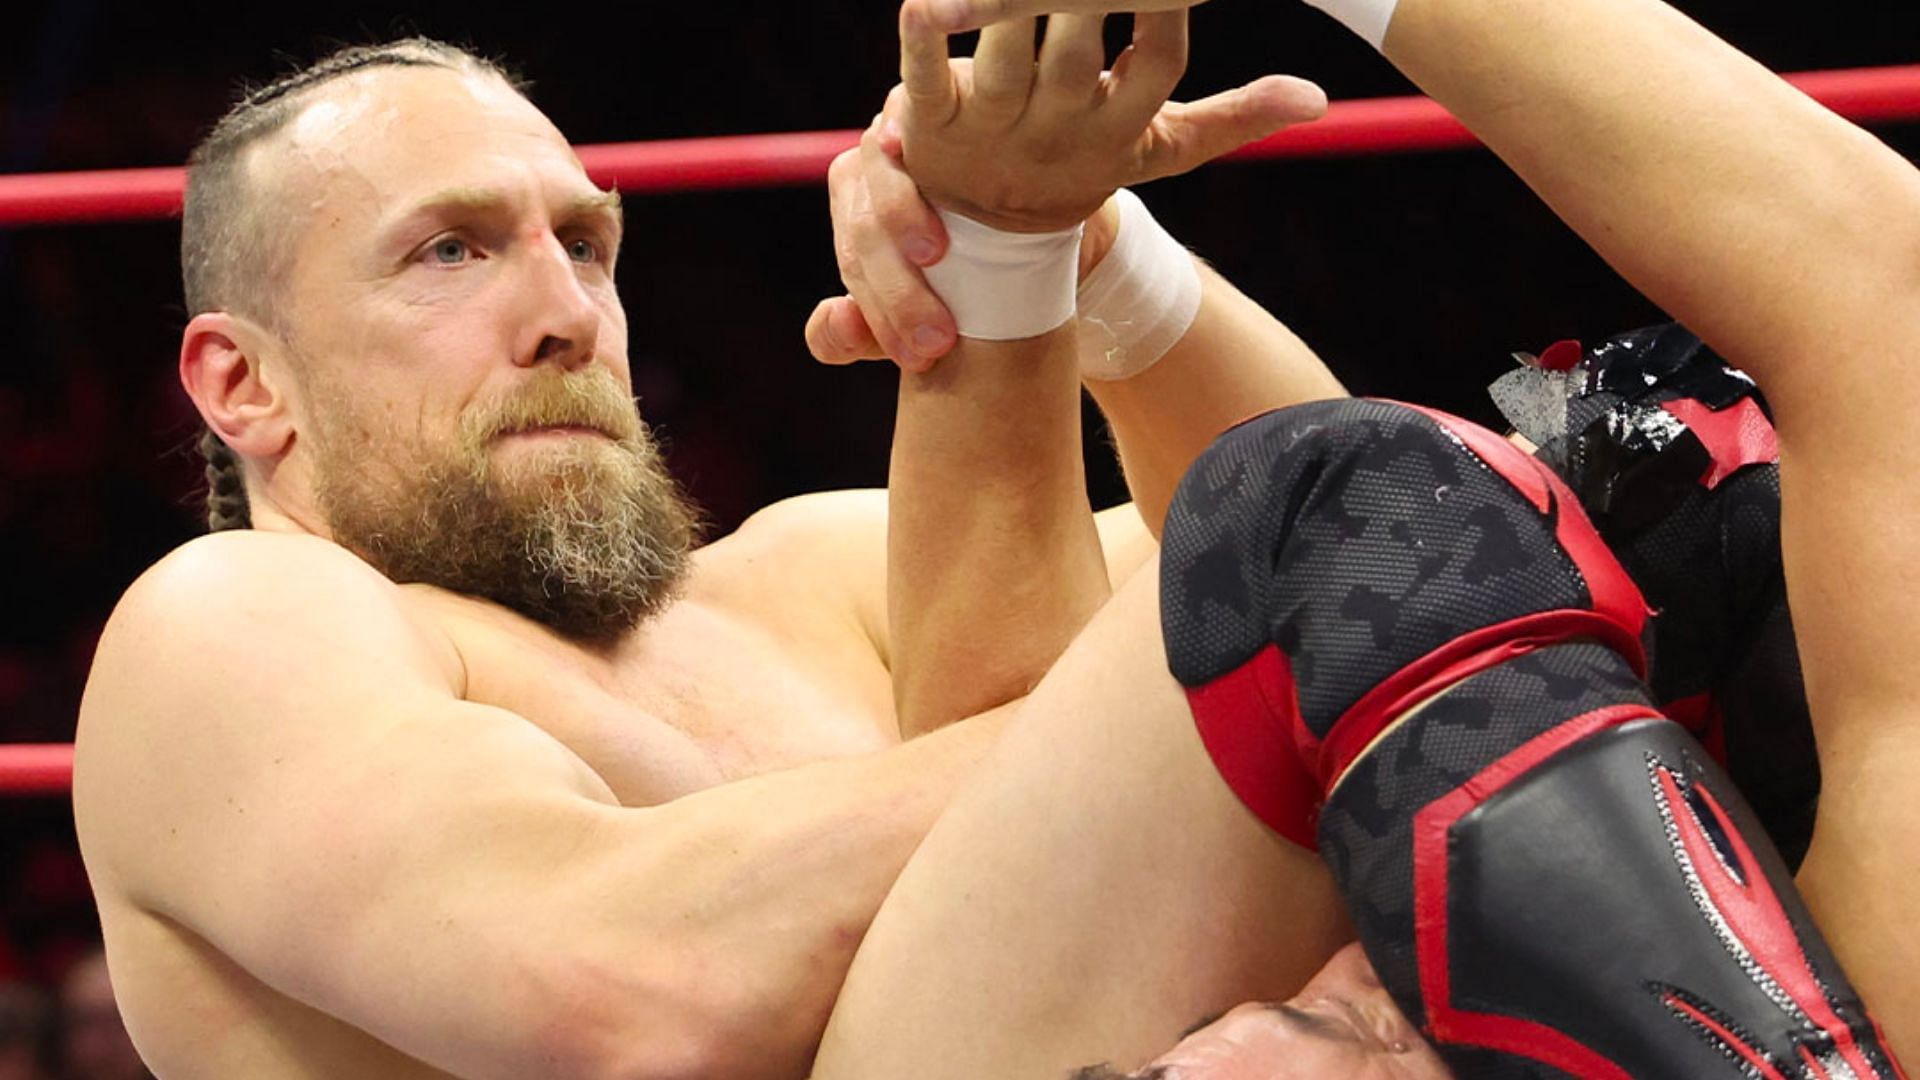 Bryan Danielson is one of the best technical wrestlers in the world